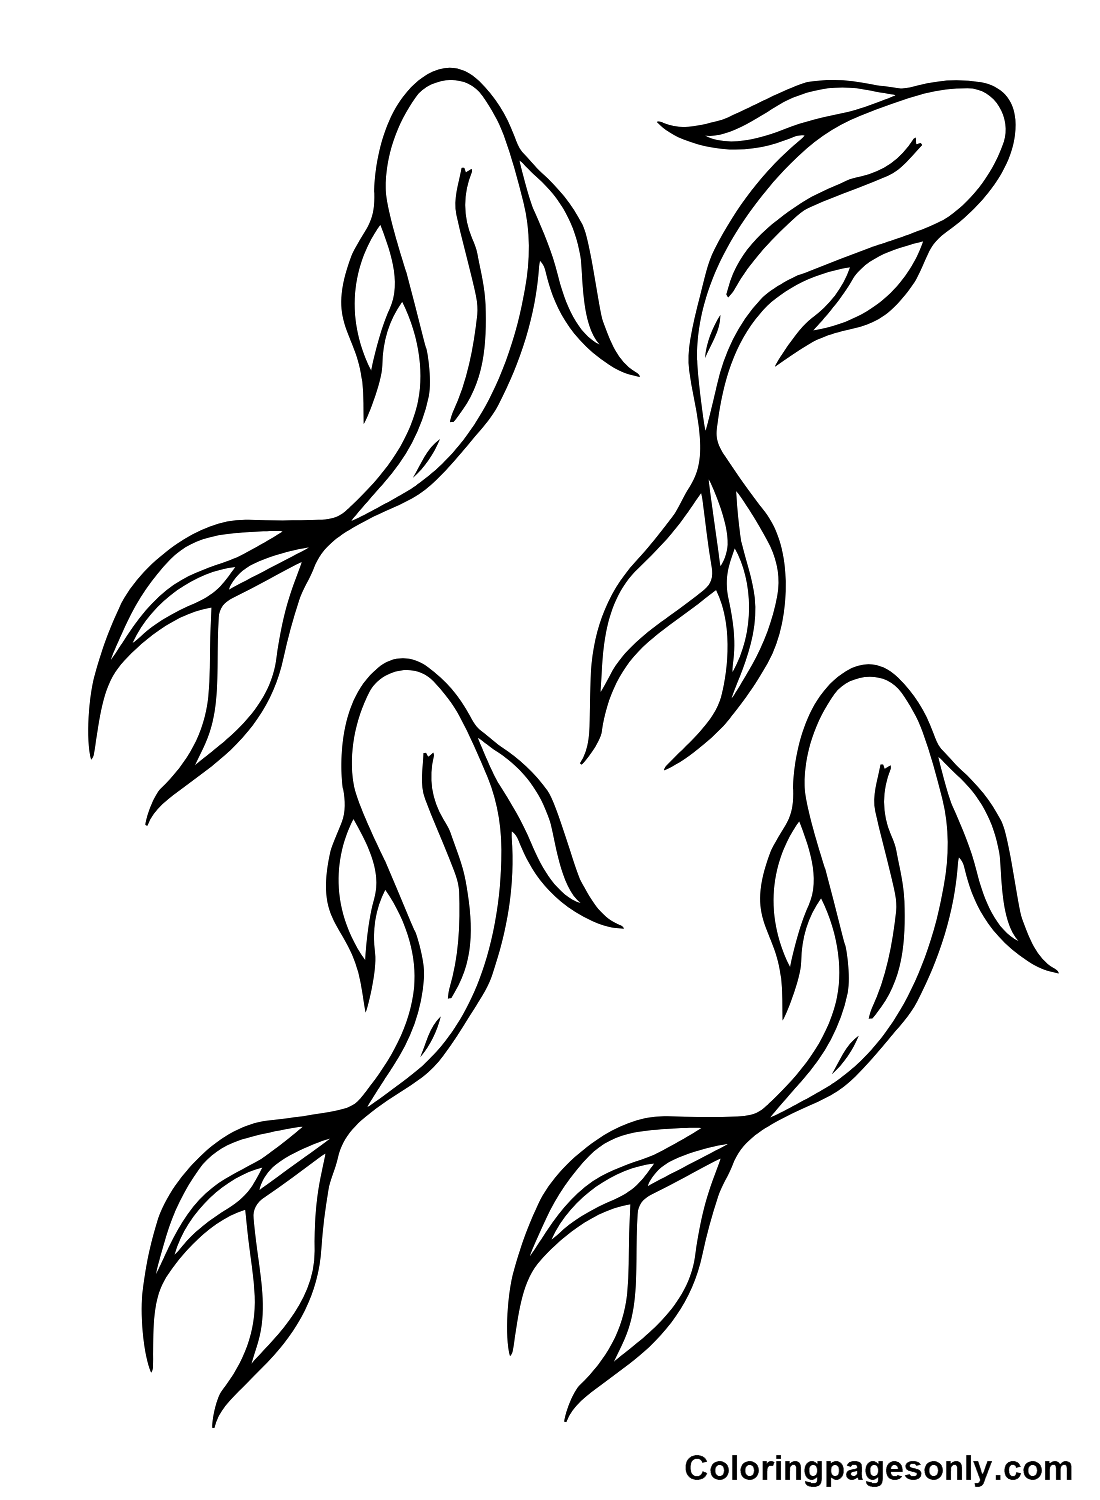 Koi Fish Outline Coloring Pages